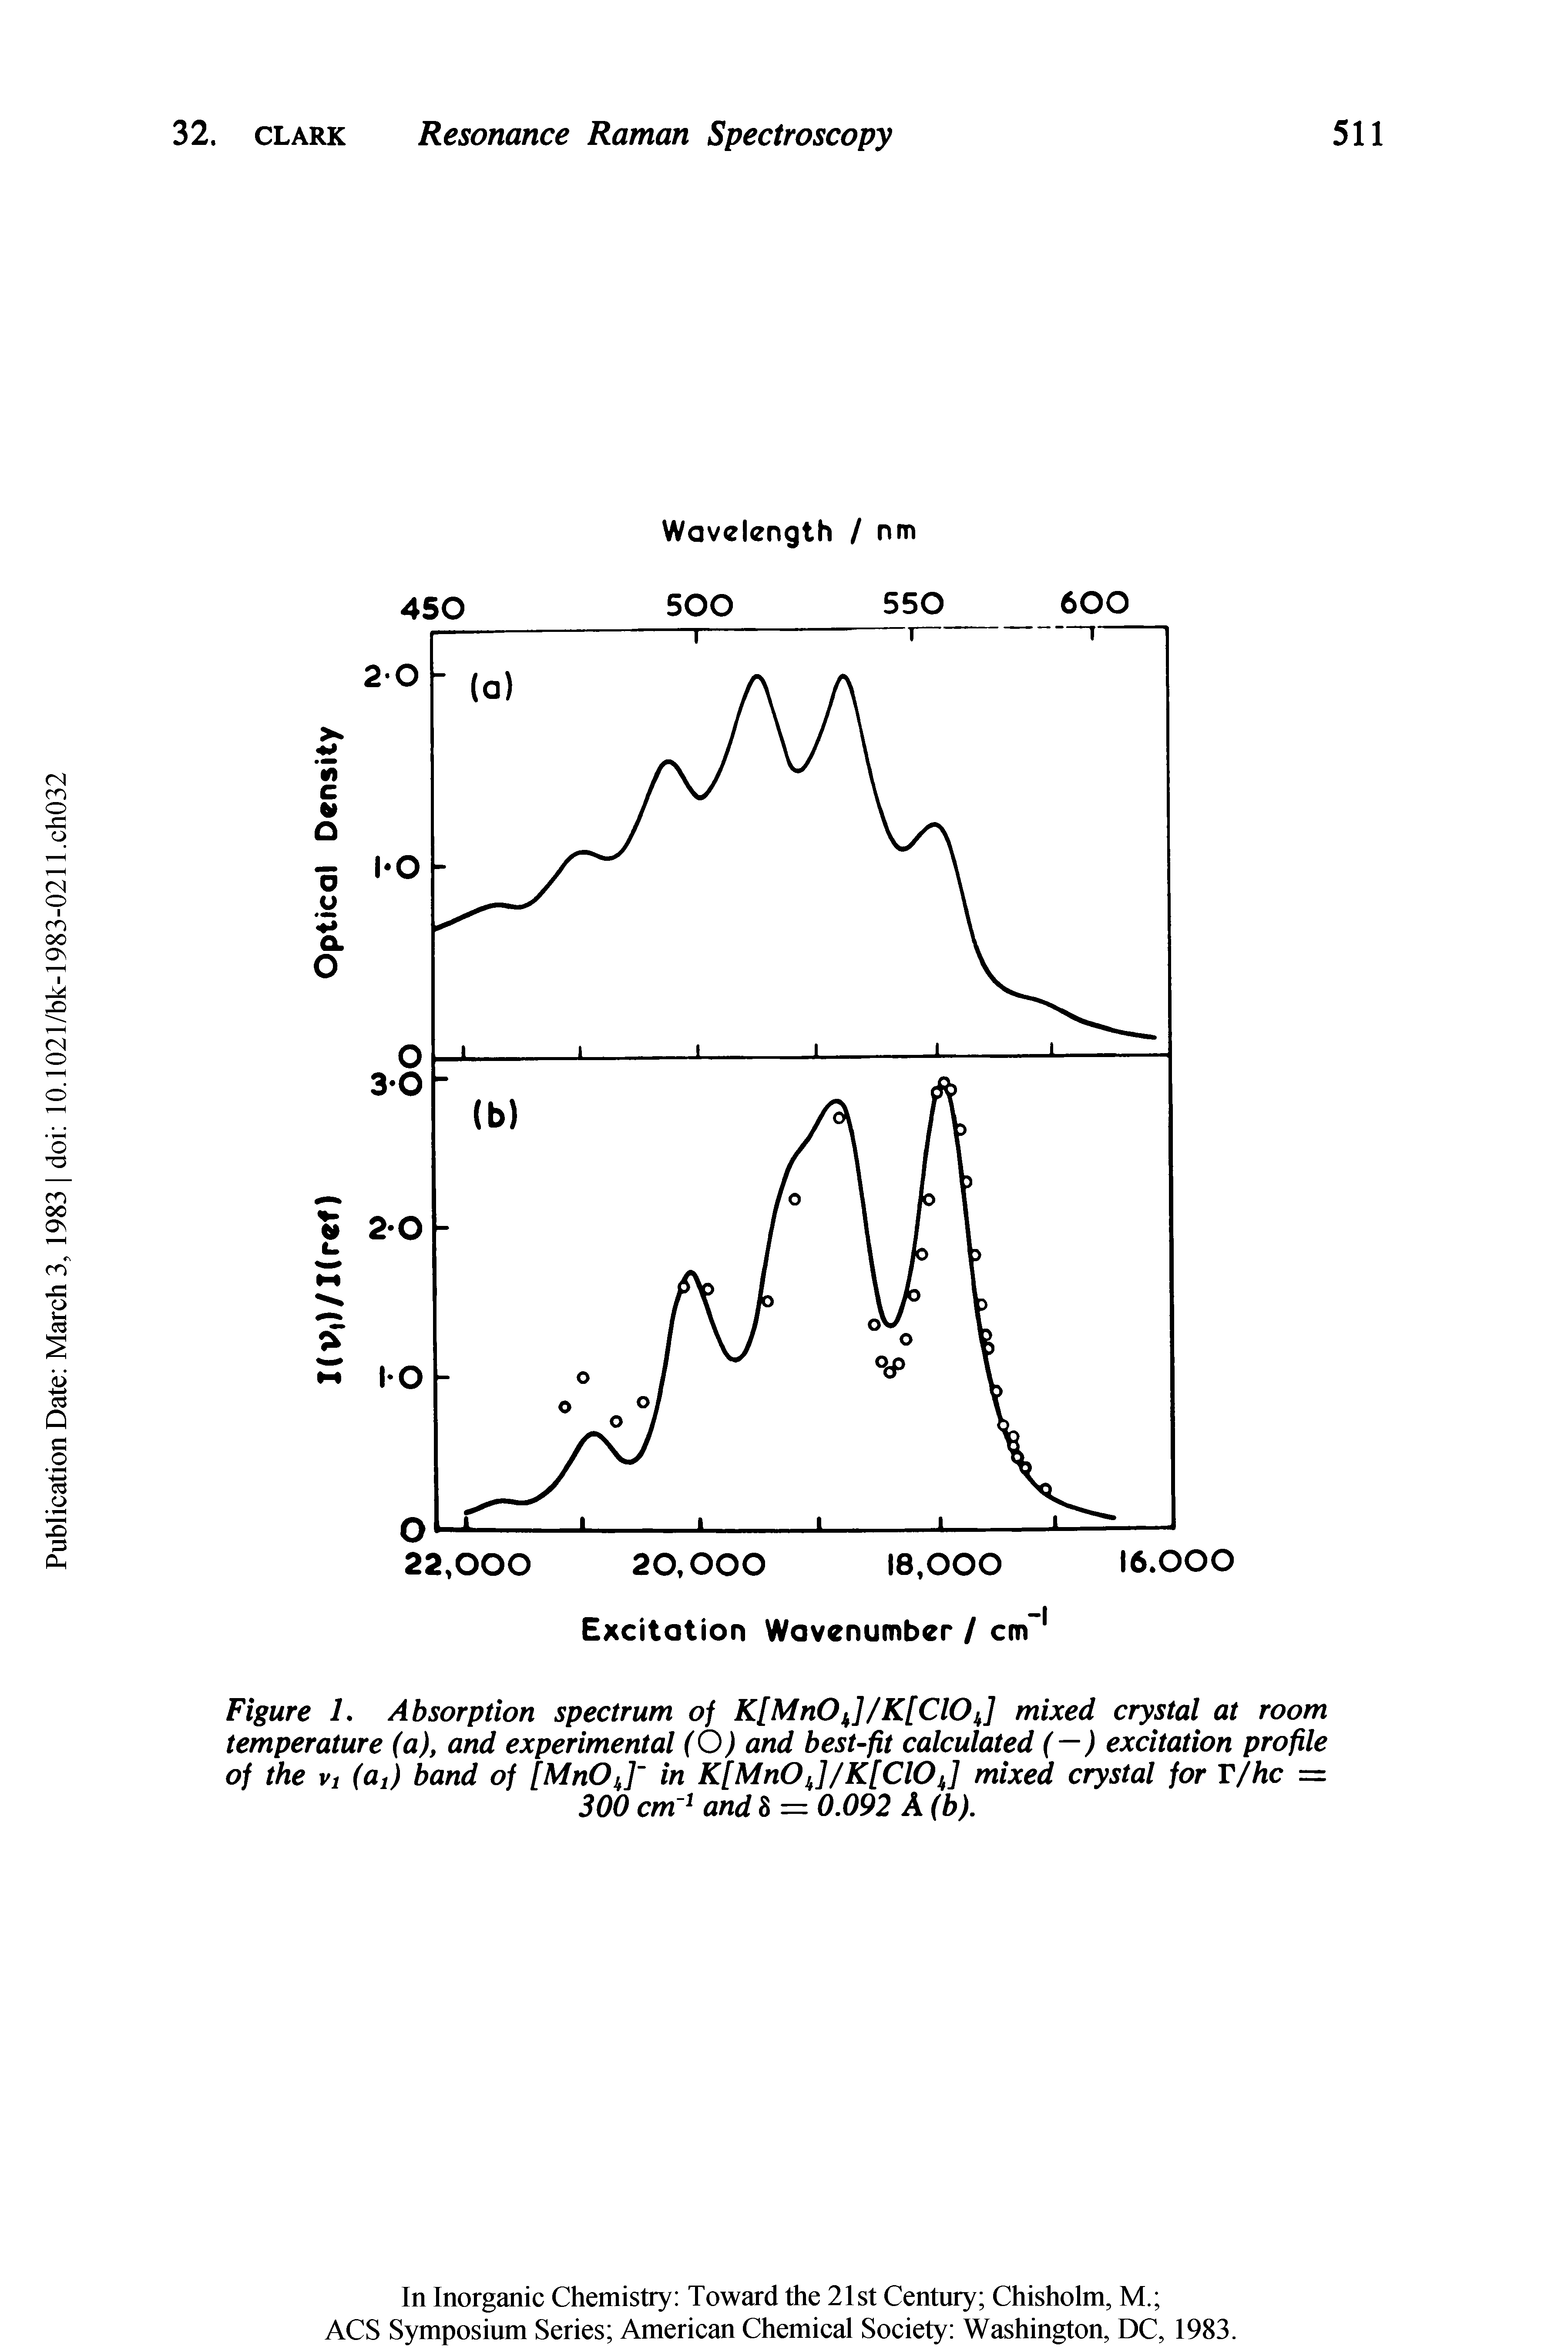 Figure L Absorption spectrum of K[MnOJ/K[CIOJ mixed crystal at room temperature (a), and experimental (O) and best-fit calculated (—) excitation profile of the vt (at) band of [MnOJ" in K[MnOj/K[ClOJ mixed crystal for T/hc = 300 cm1 and 8 = 0.092 A (b).